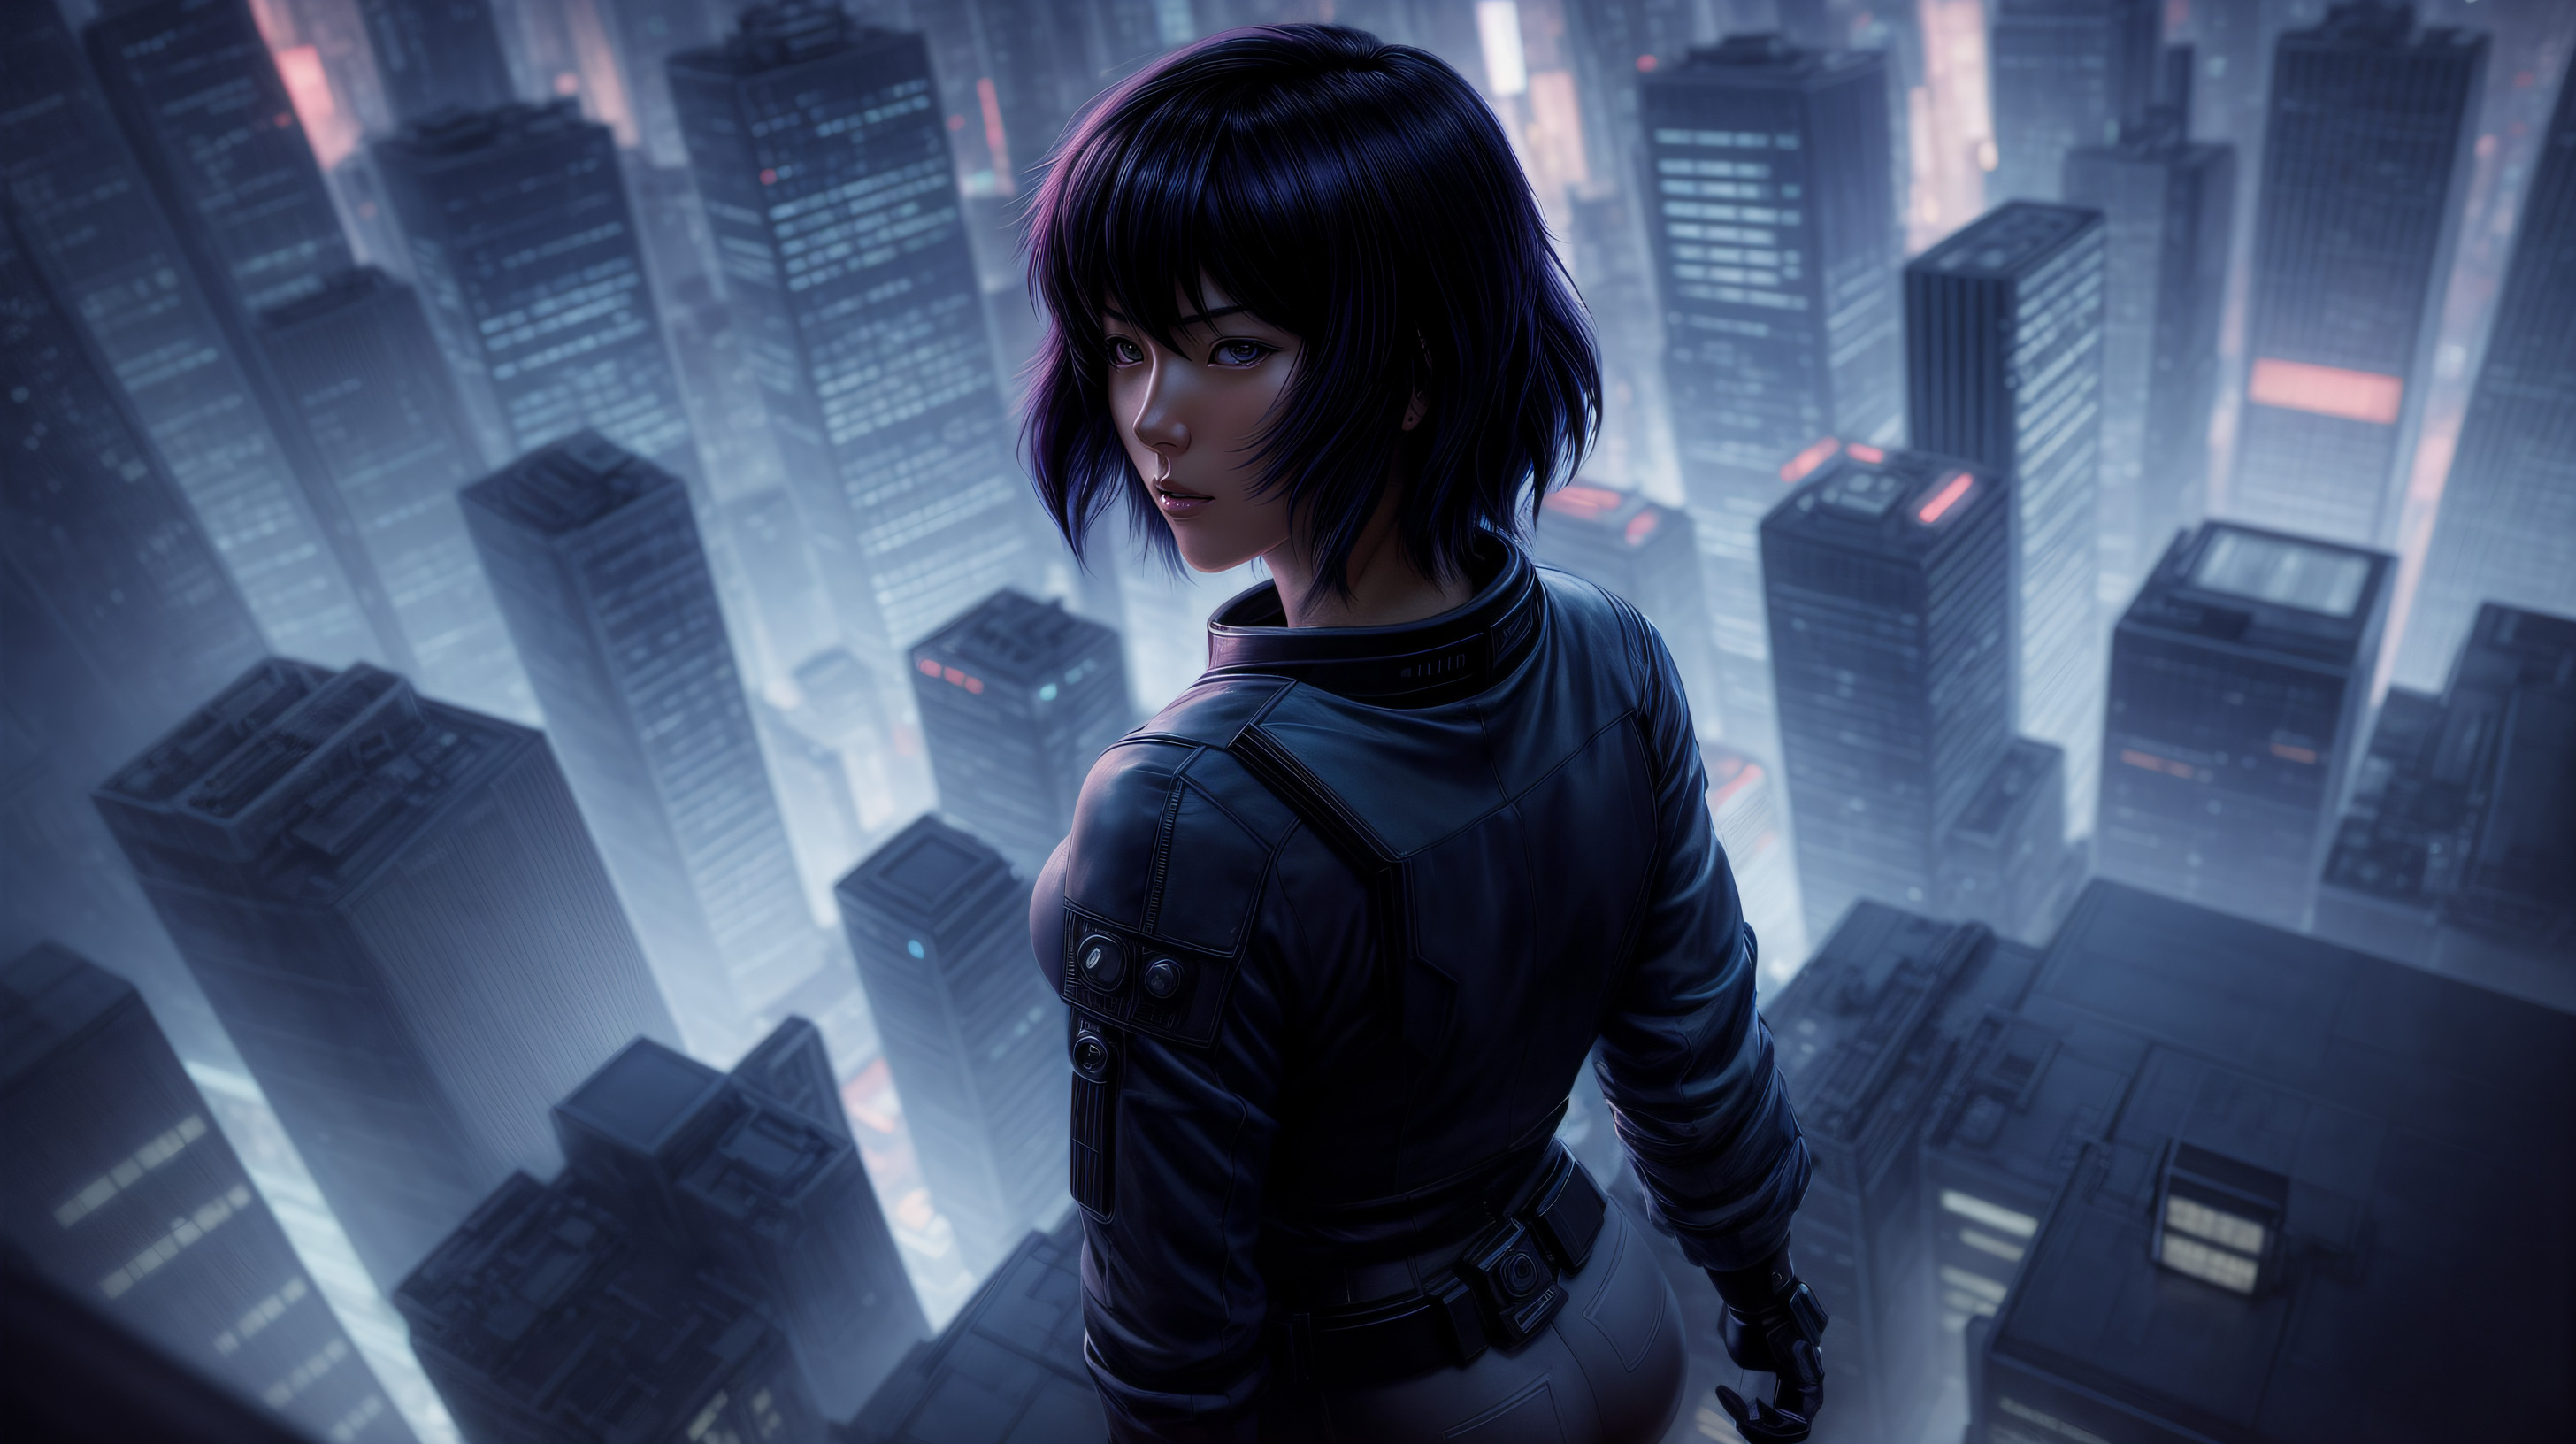 Ghost In The Shell Cool Anime Art Wallpaper, HD Artist 4K Wallpapers ...